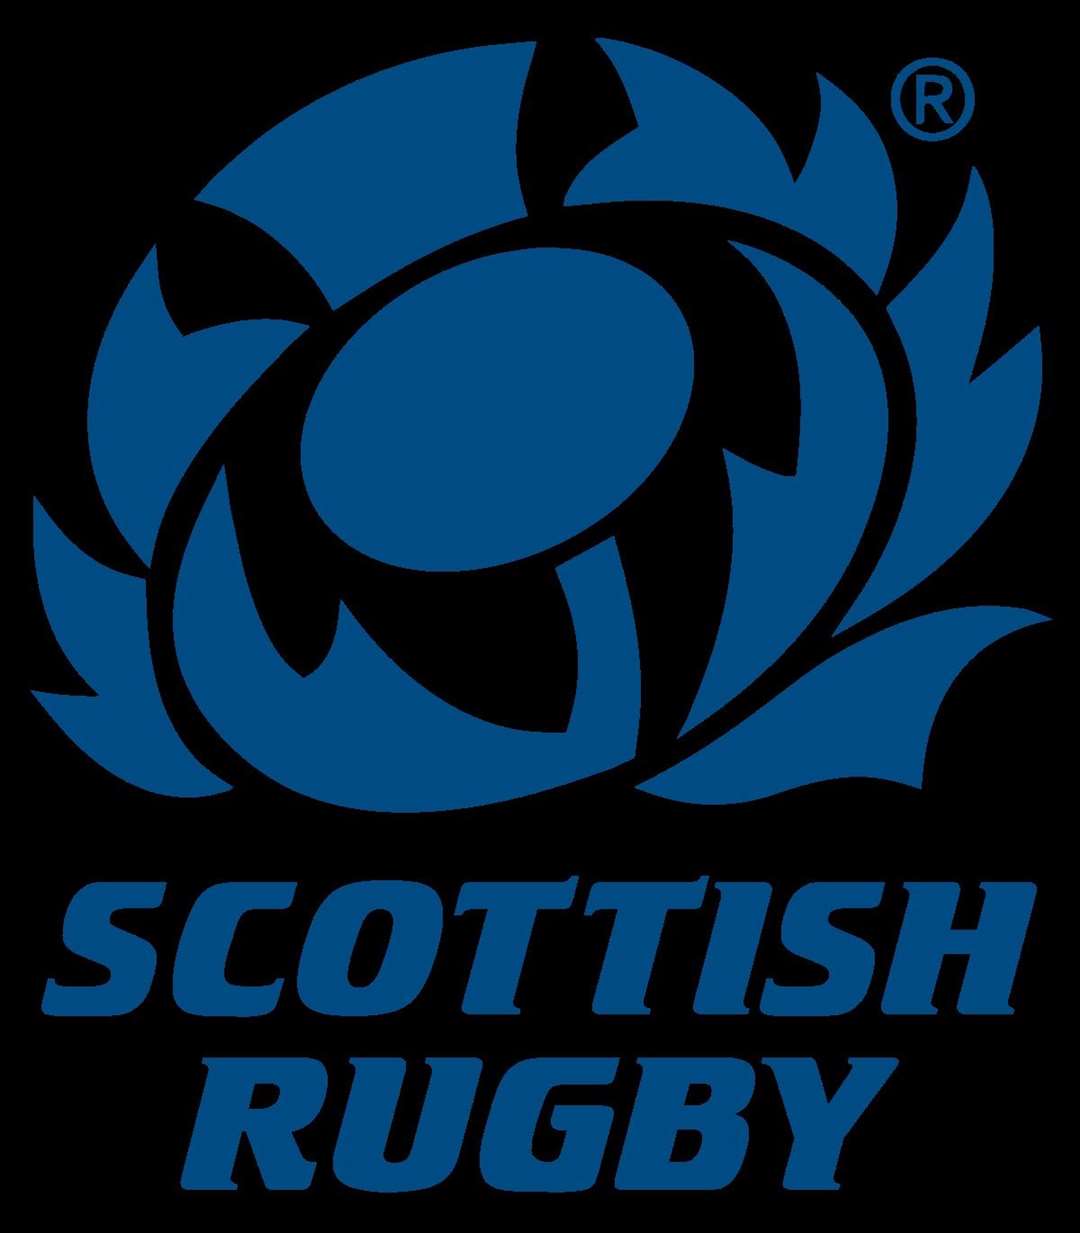 Scotland won at Twickenham for the first time in 38 years.